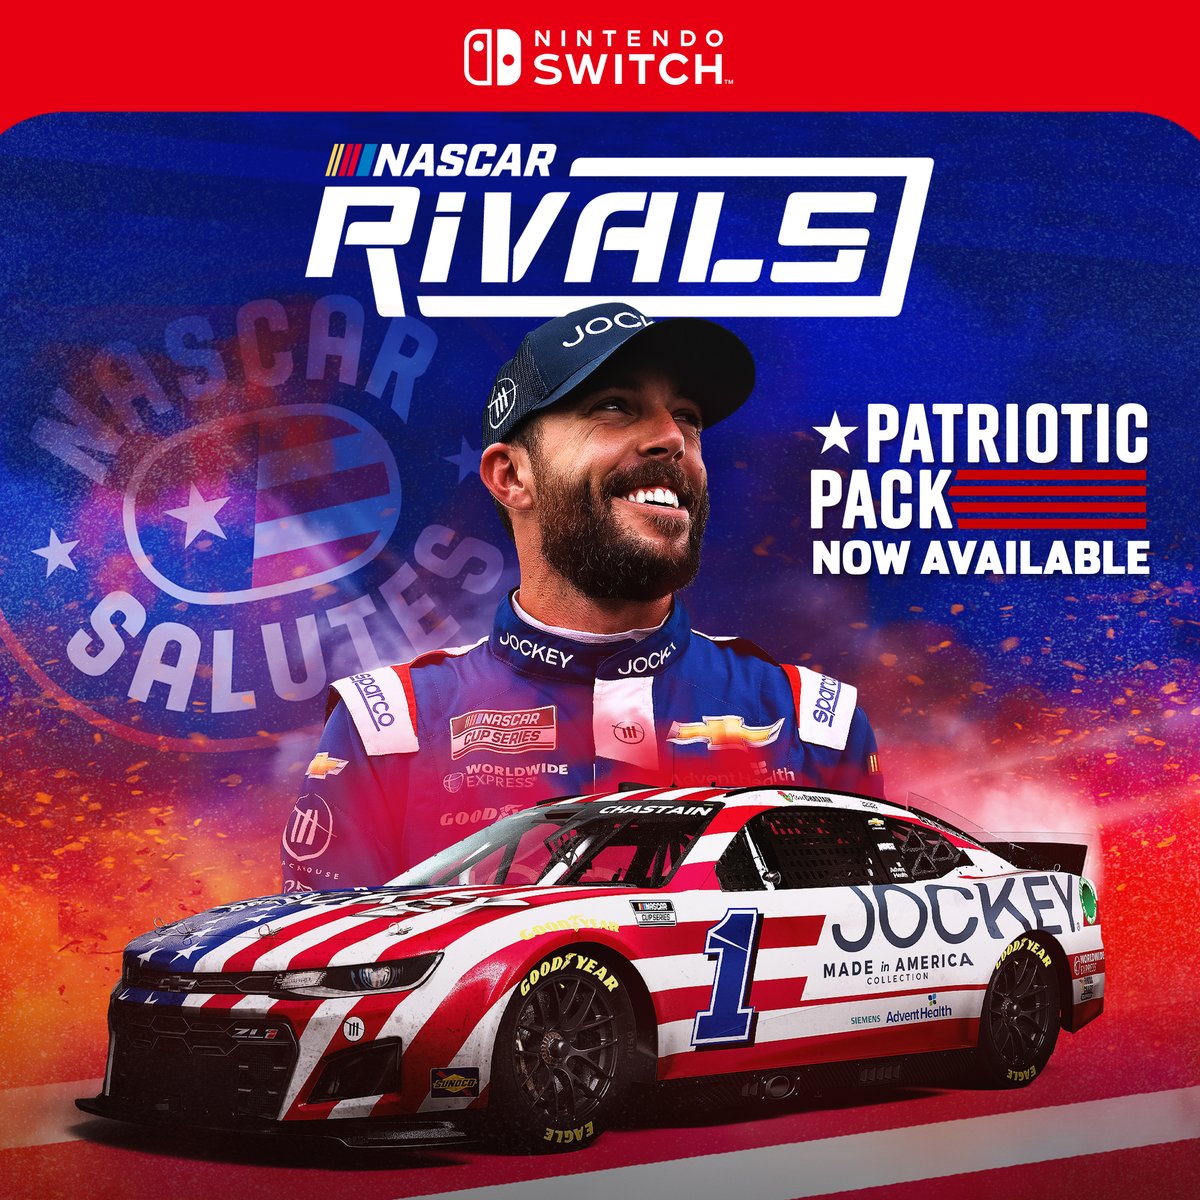 Relive more of your favorite moments with the #NASCARRivals Patriotic Pack! This pack features 5 NEW Challenges, 30 alternate paint schemes, legendary #NASCAR driver Bill Elliott, and more! Available now: bit.ly/3IIrfMA